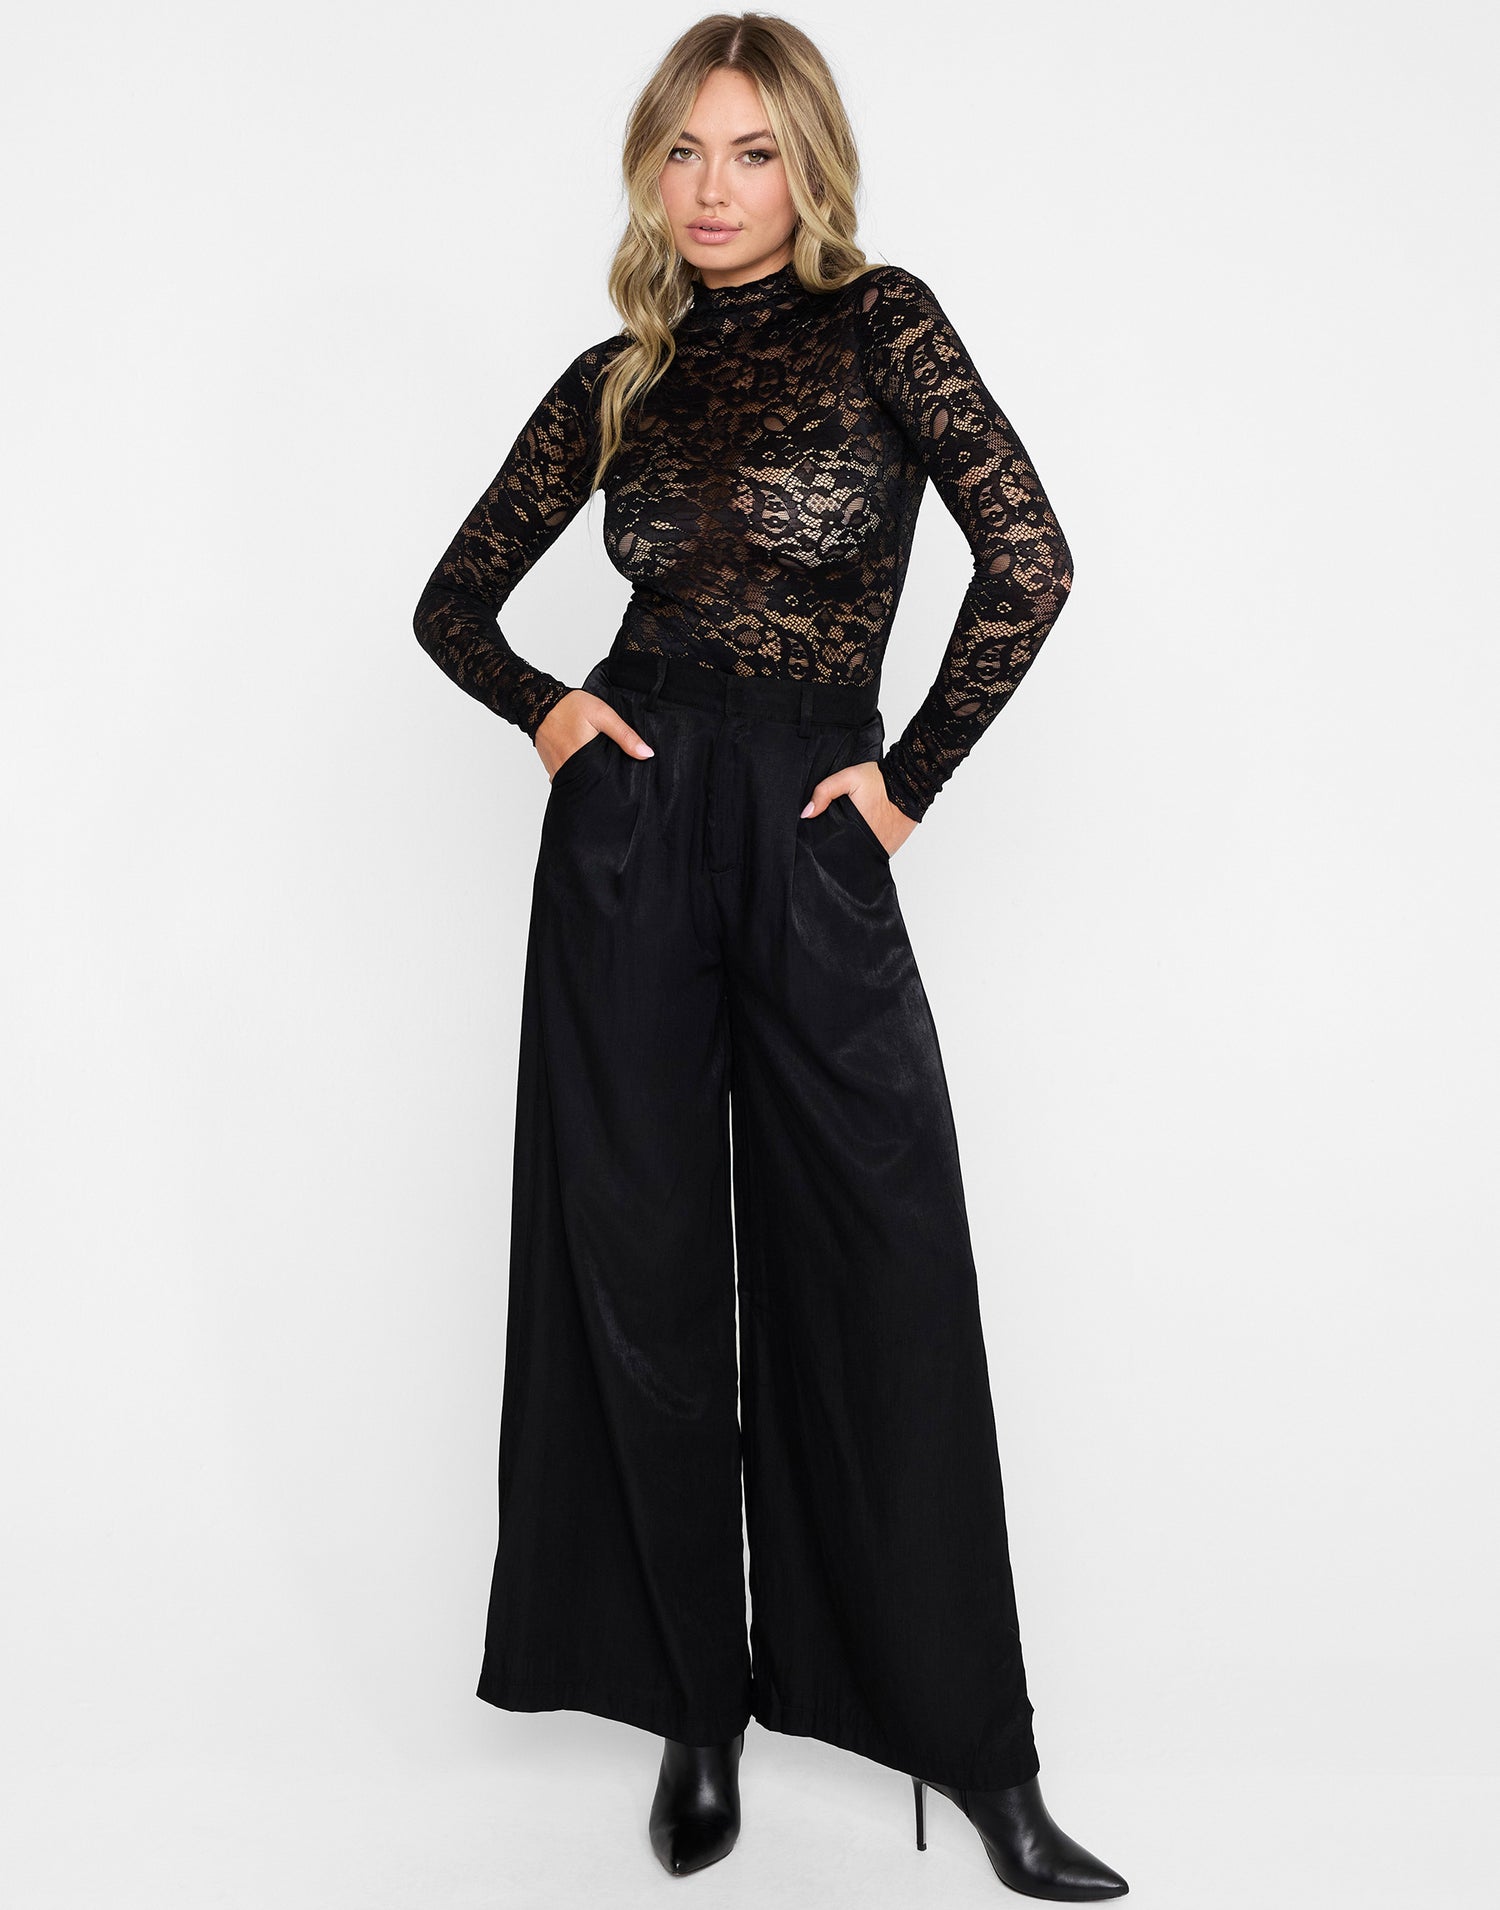 Jayda Wide Leg Pant by Summer Haus in Black - Alternate Front View 